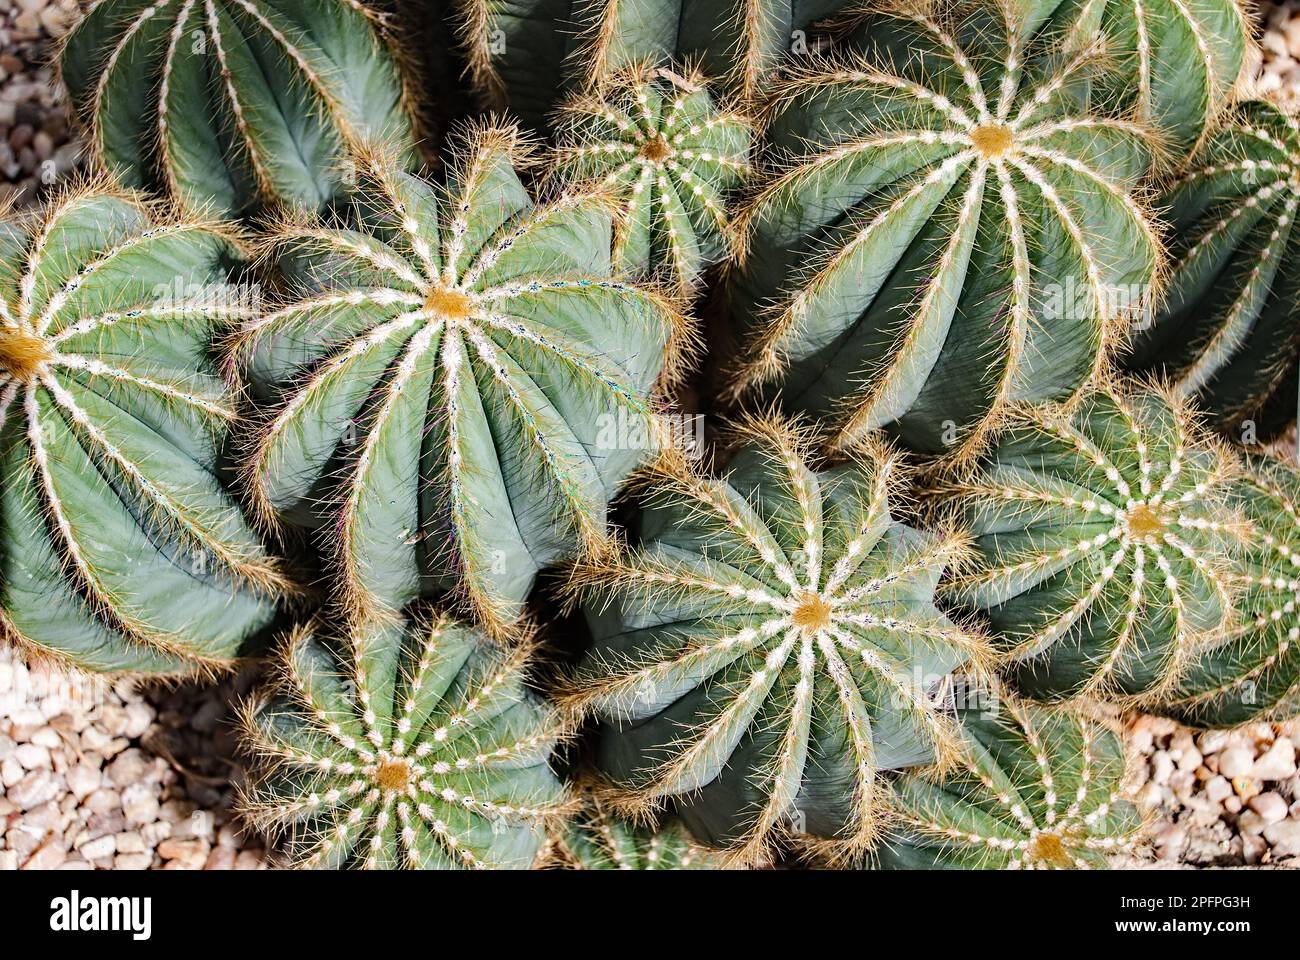 Parodia Magnifica or Balloon cactus starts off growing spherical but becomes more cylindrical with age. Stock Photo